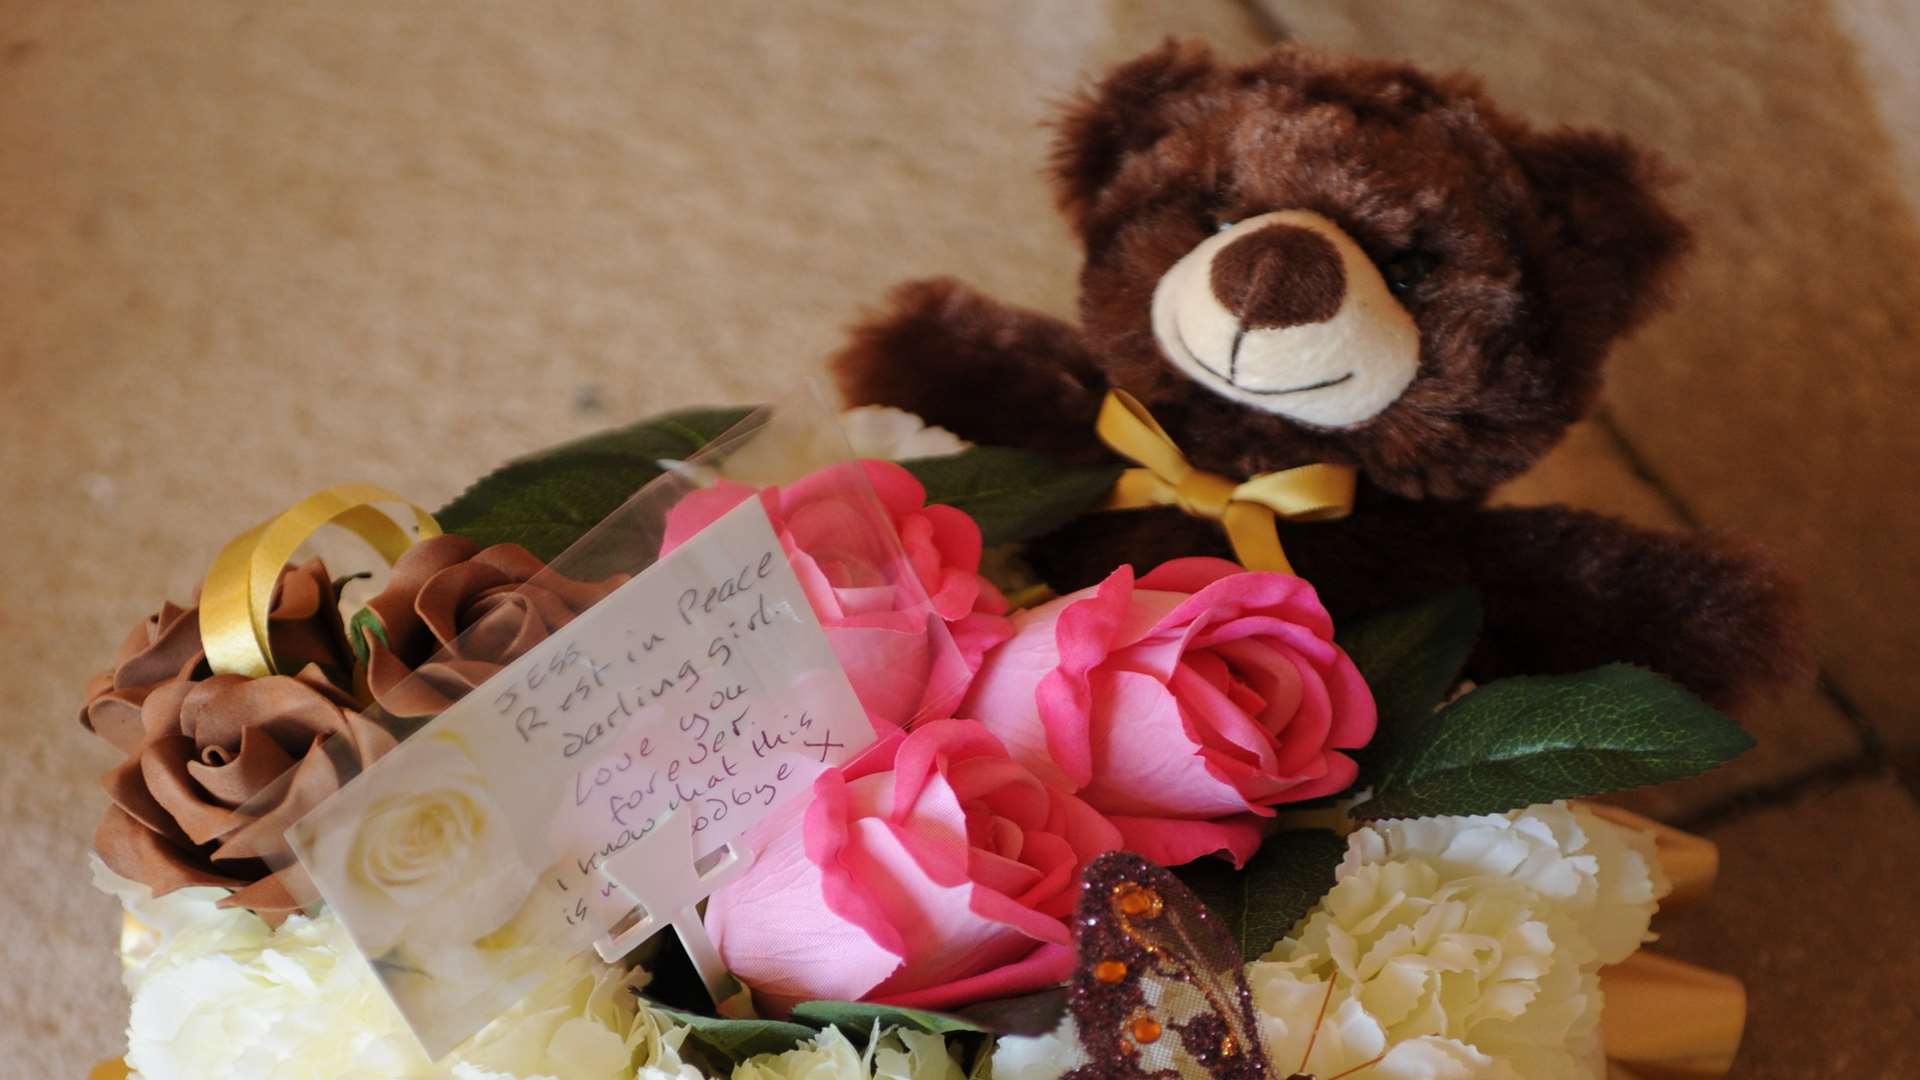 Floral tributes left for Jessica